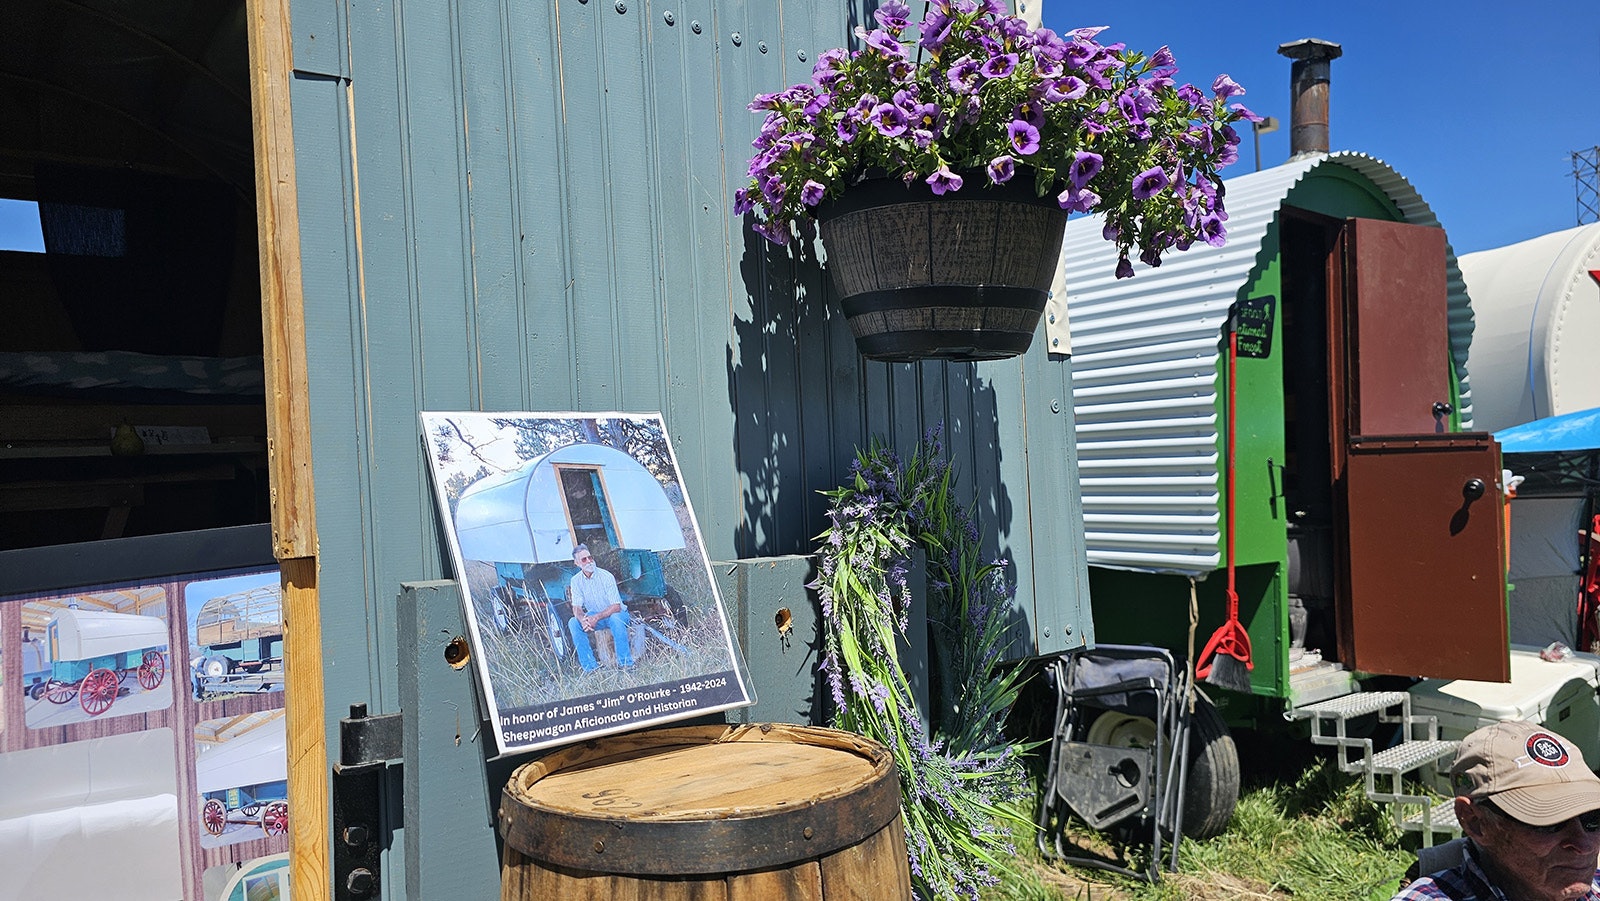 A memorial to Jim O'Rourke was set up at Gillette's third annual Sheepherding Festival.